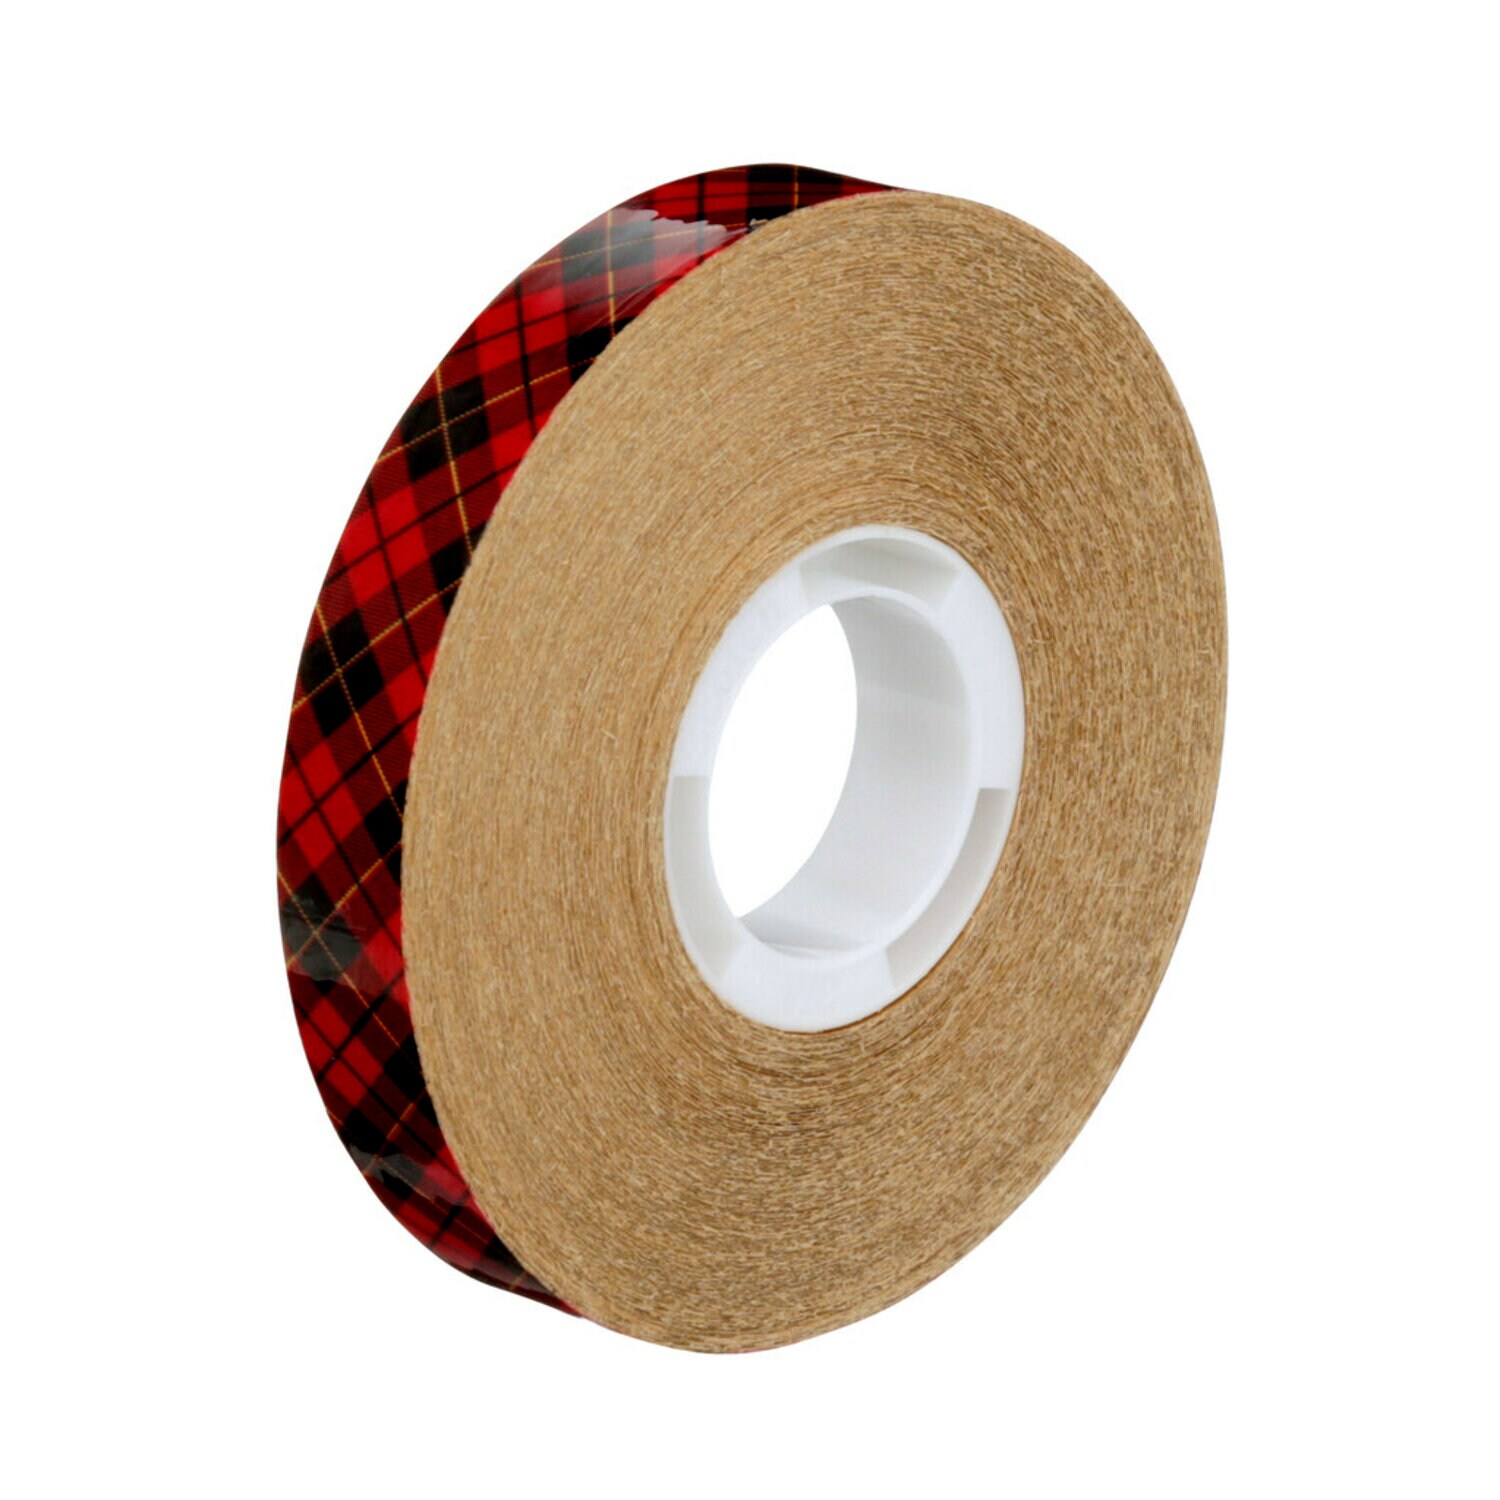 7100137416 - Scotch ATG Adhesive Transfer Tape 924, Clear, 1/2 in x 36 yd, 2 mil, 72
Rolls/Case, Individually Boxed